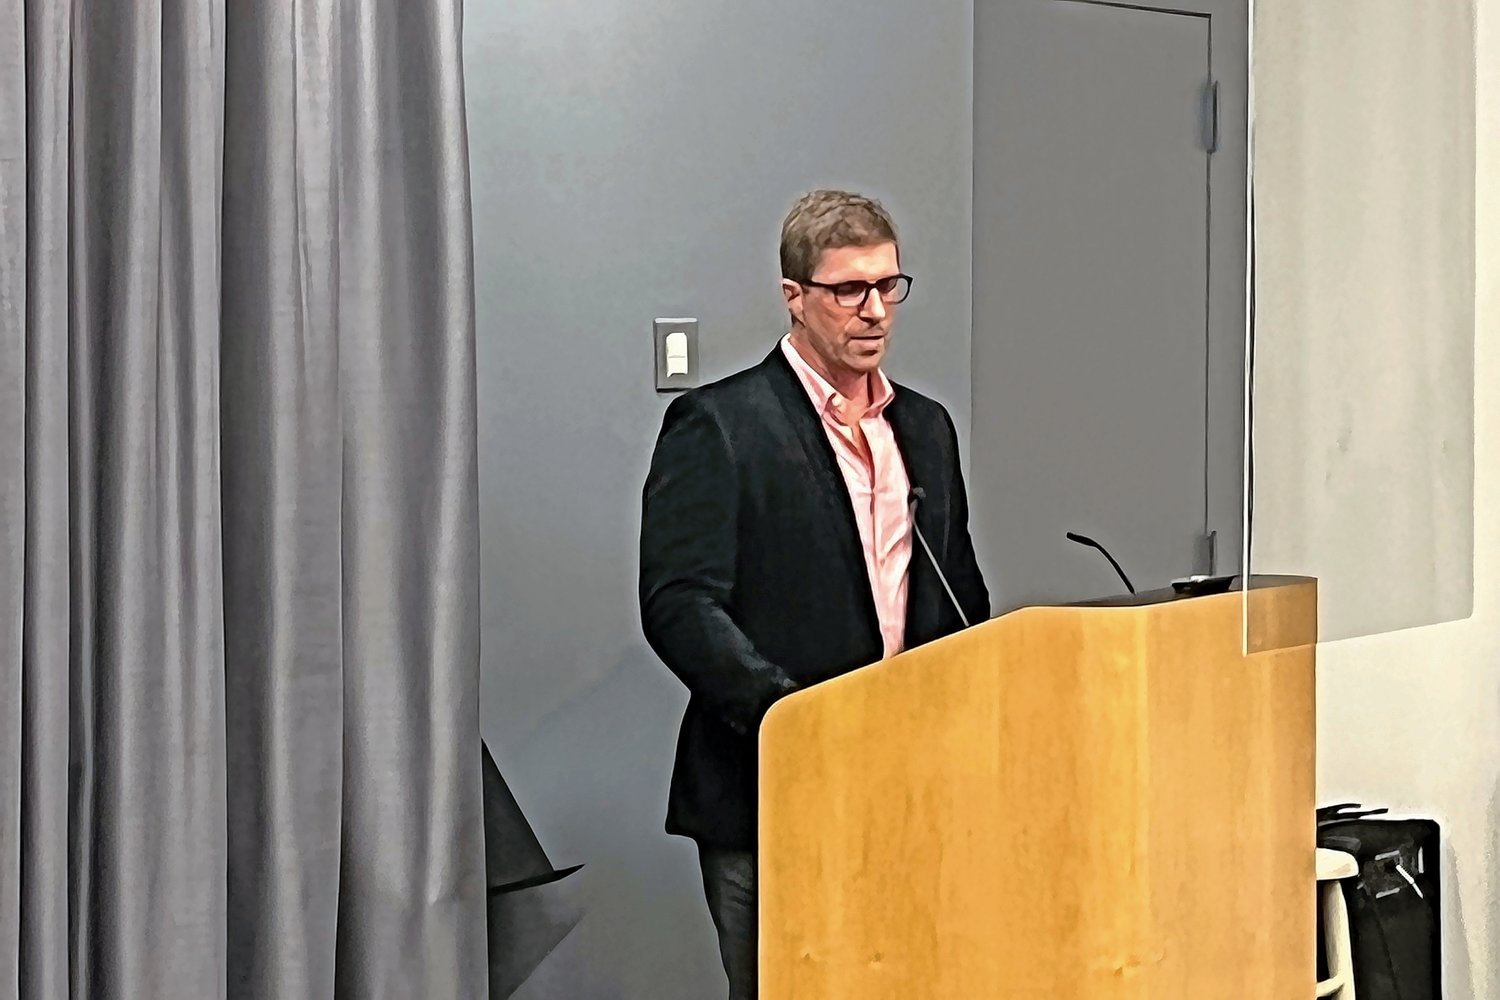 Manhattan College’s annual reading series returned on Oct. 13 with one of the co-authors of The New York Times bestselling novel ‘The Strain’ Chuck Hogan doing a reading.